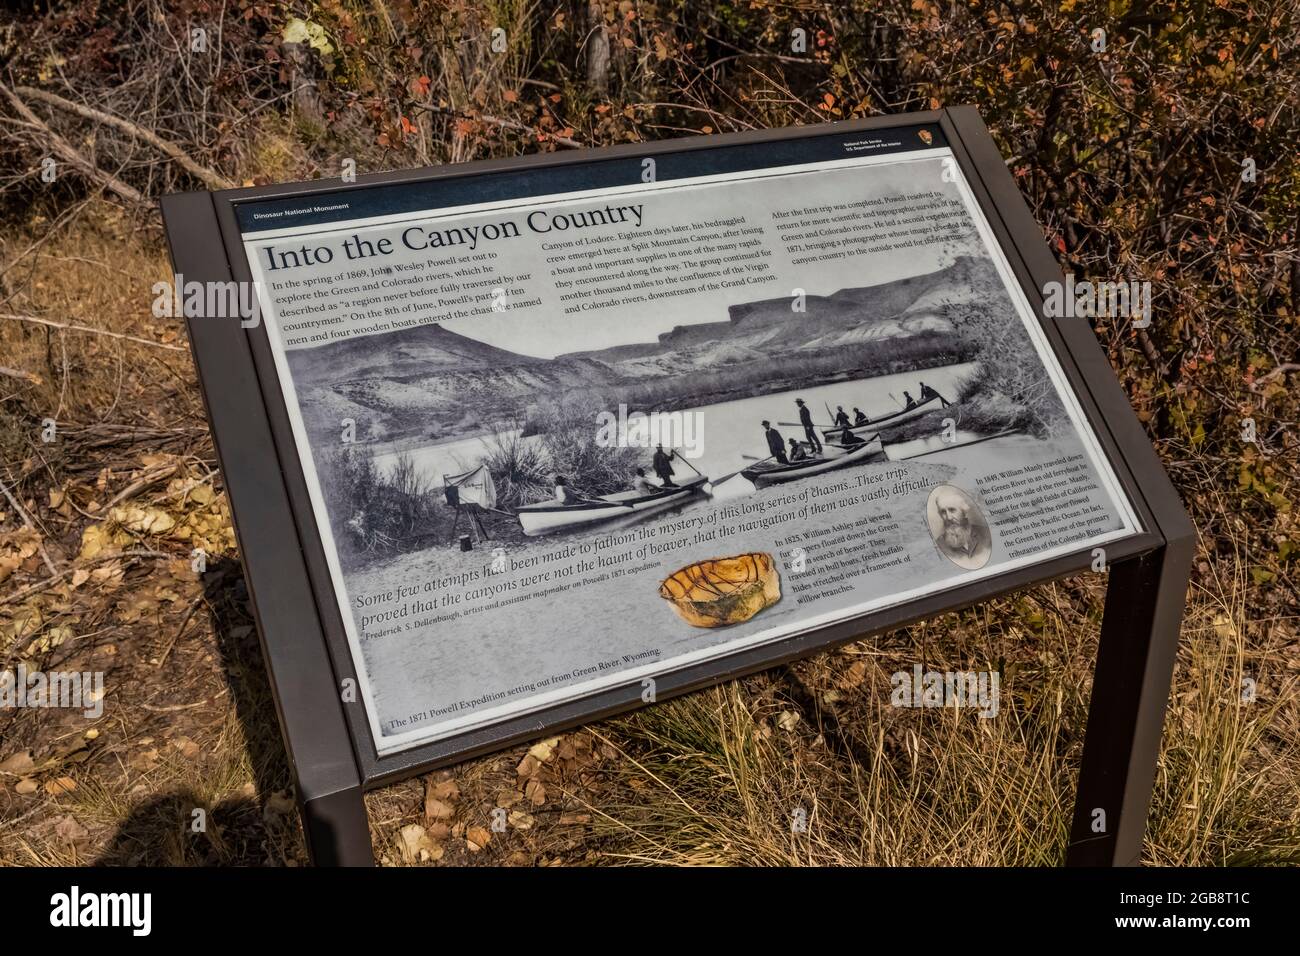 Interpretive sign about John Wesley Powell expedition through Split Mountain Canyon of Dinosaur National Monument, Utah, USA Stock Photo